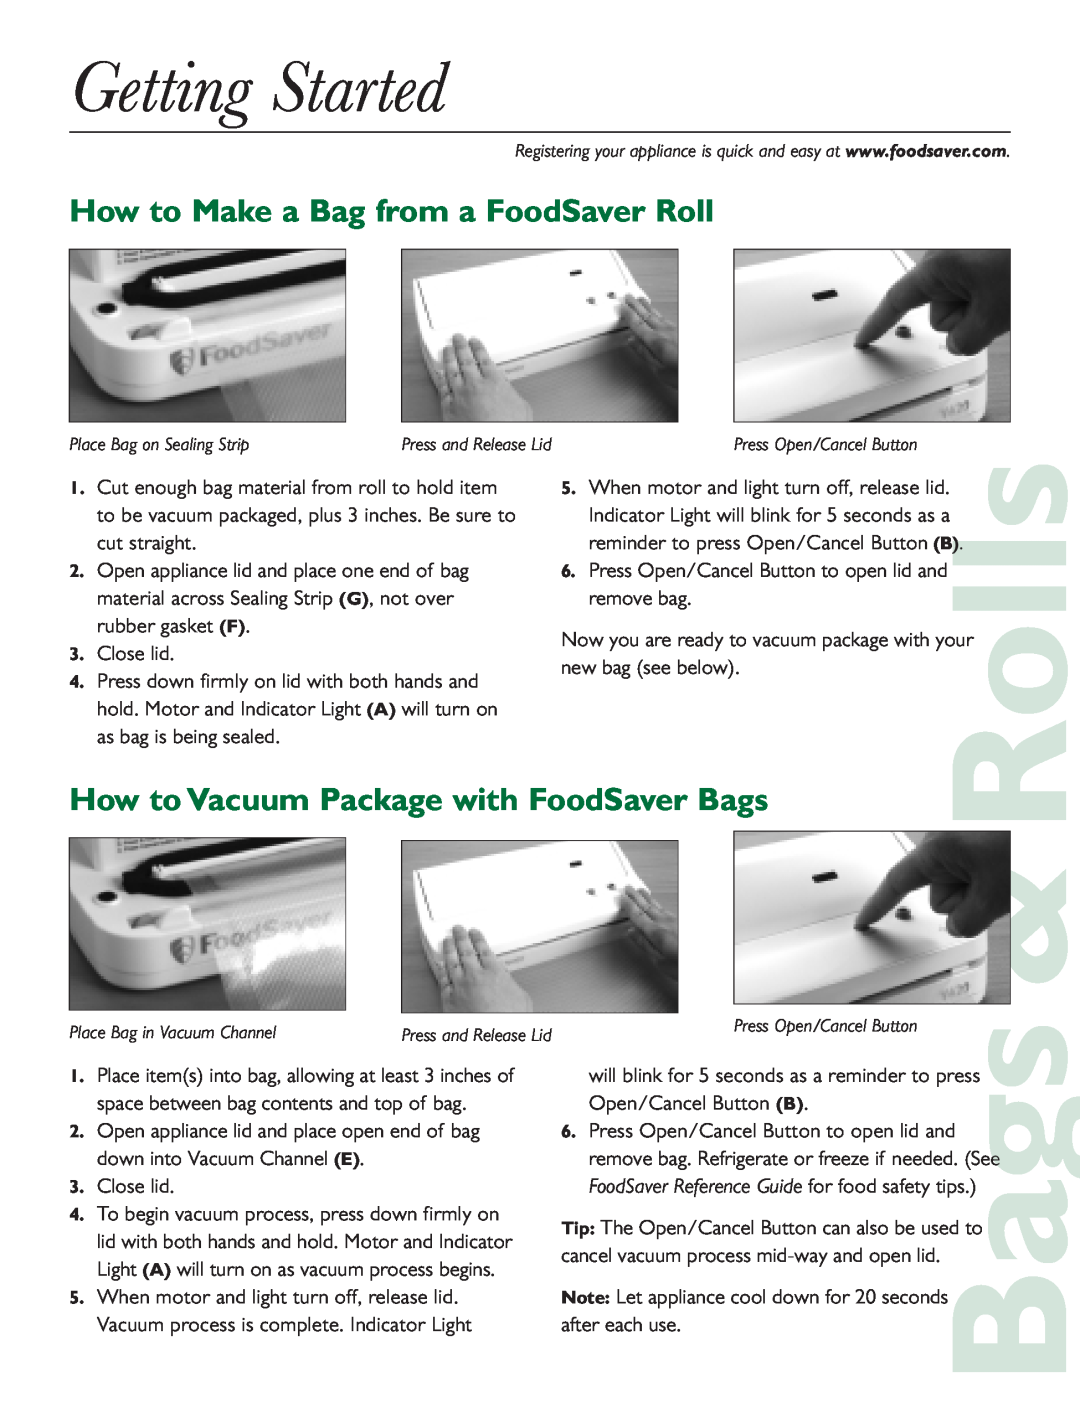 FoodSaver V420, Mini Plus quick start Getting Started, How to Make a Bag from a FoodSaver Roll, Rolls 